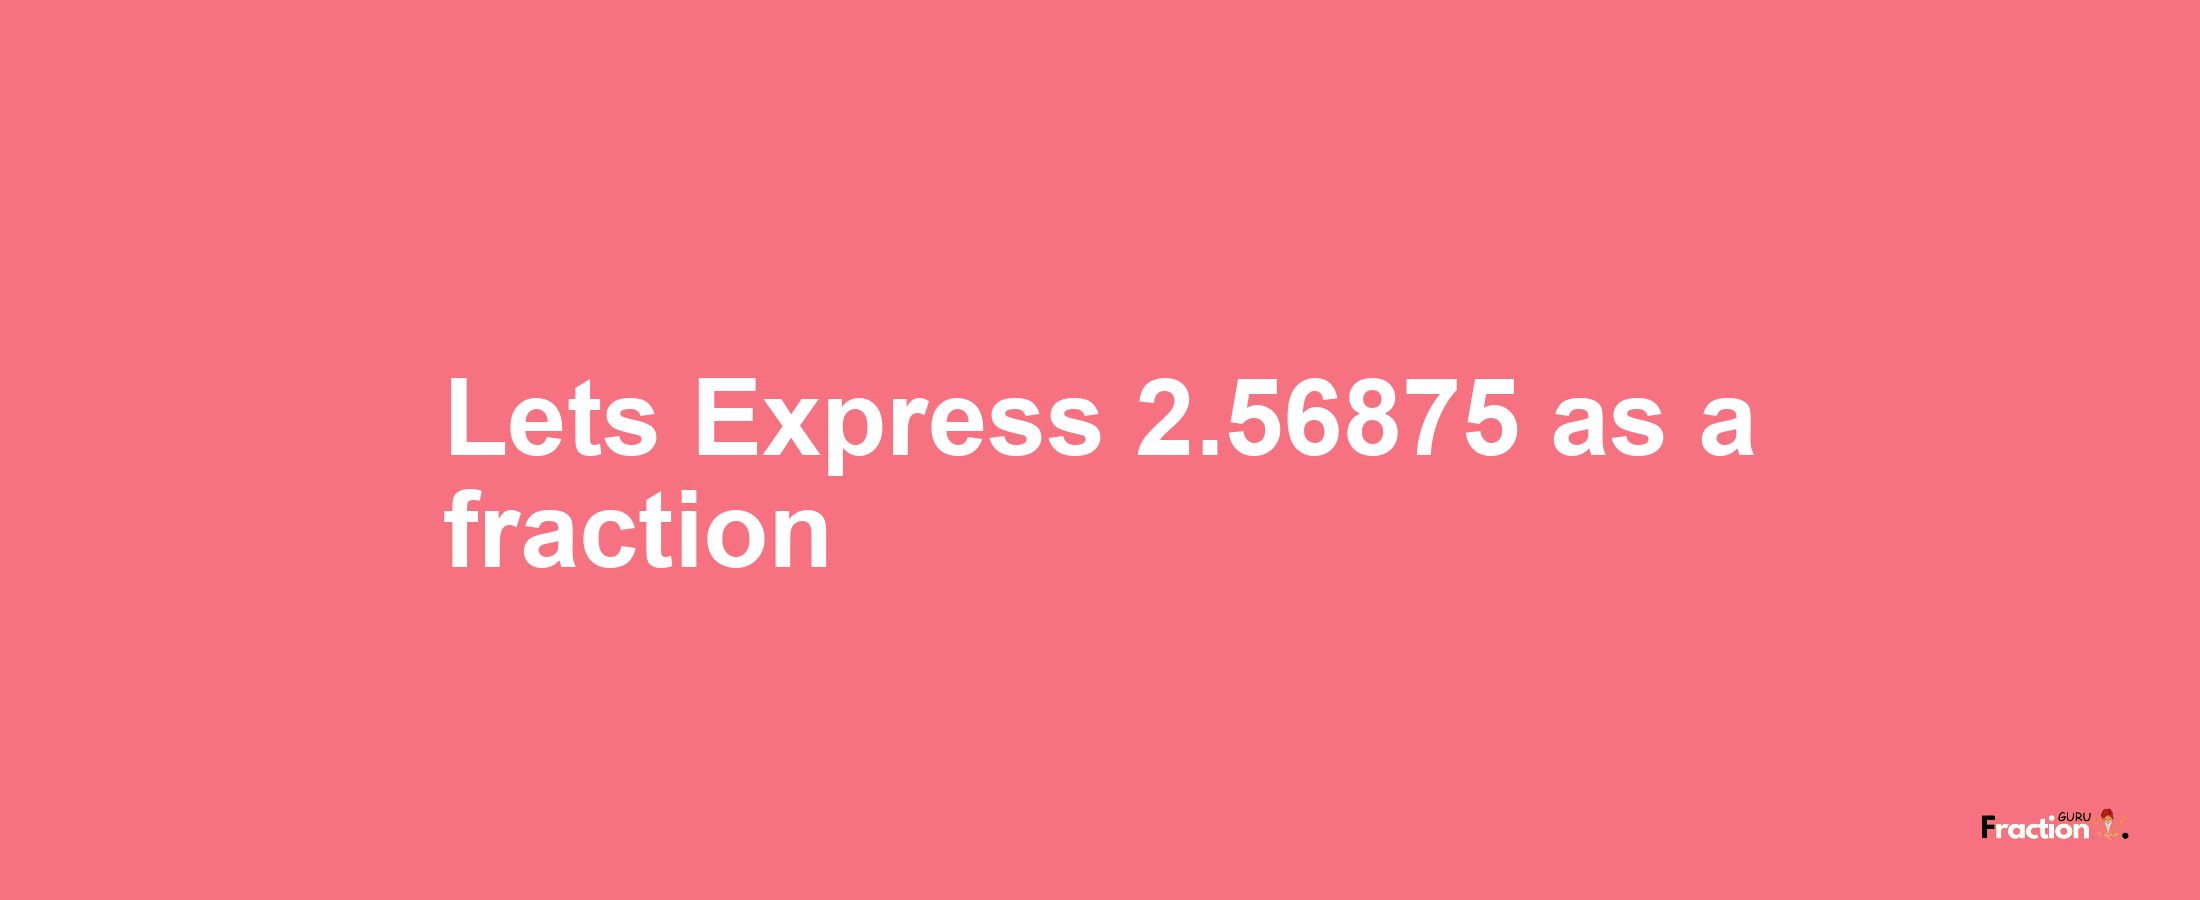 Lets Express 2.56875 as afraction